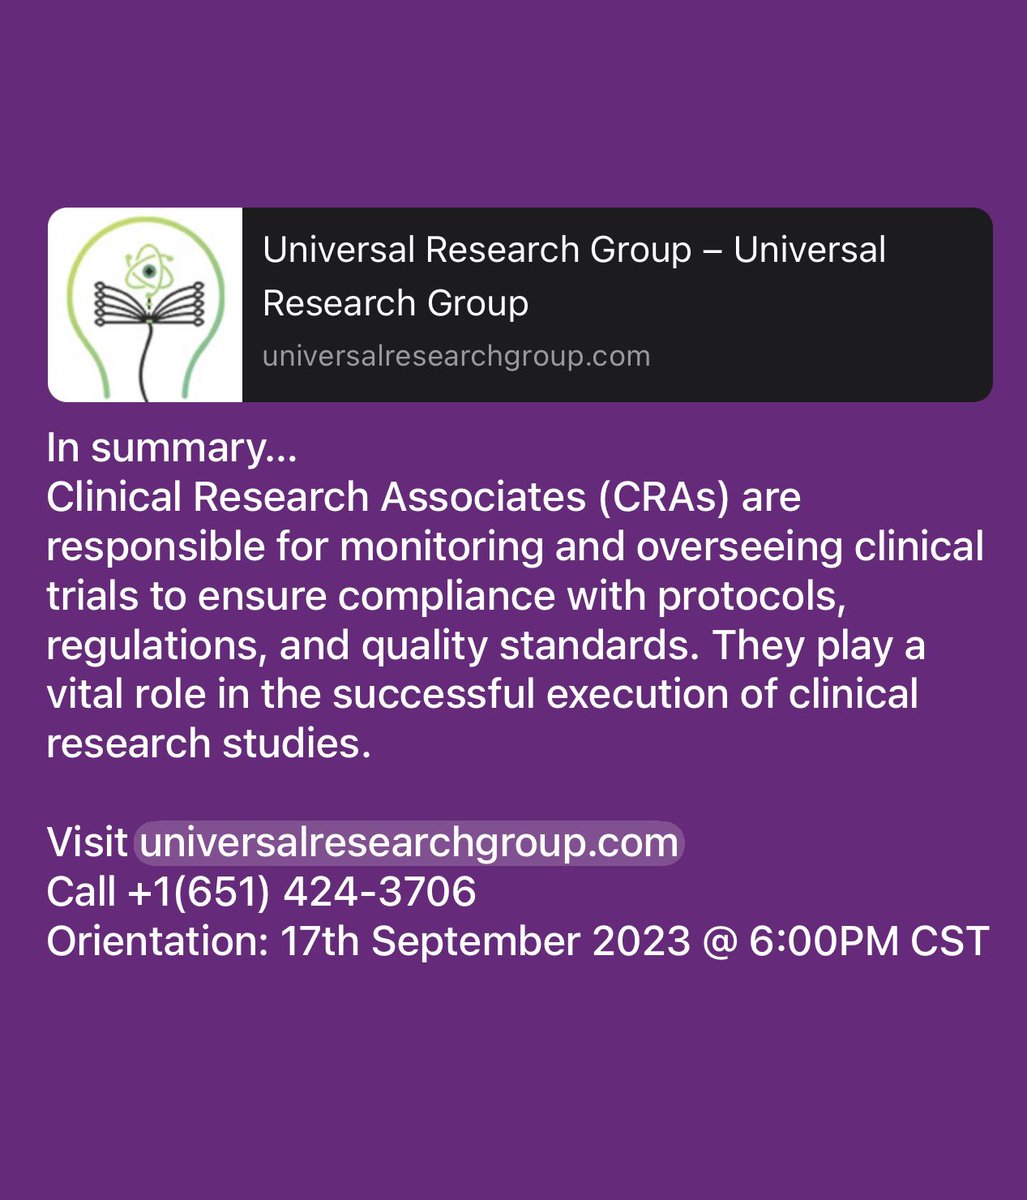 #interview #research #clinical #clinicalresearchassociate #clinicalresearchcoordinator #clinicalresearchcareers #clinicalresearch #hotel #Travel #profession #medical #medicalscientist #universal #universalresearchgroup #urg #CRA #crc #consulting #universal #group #research